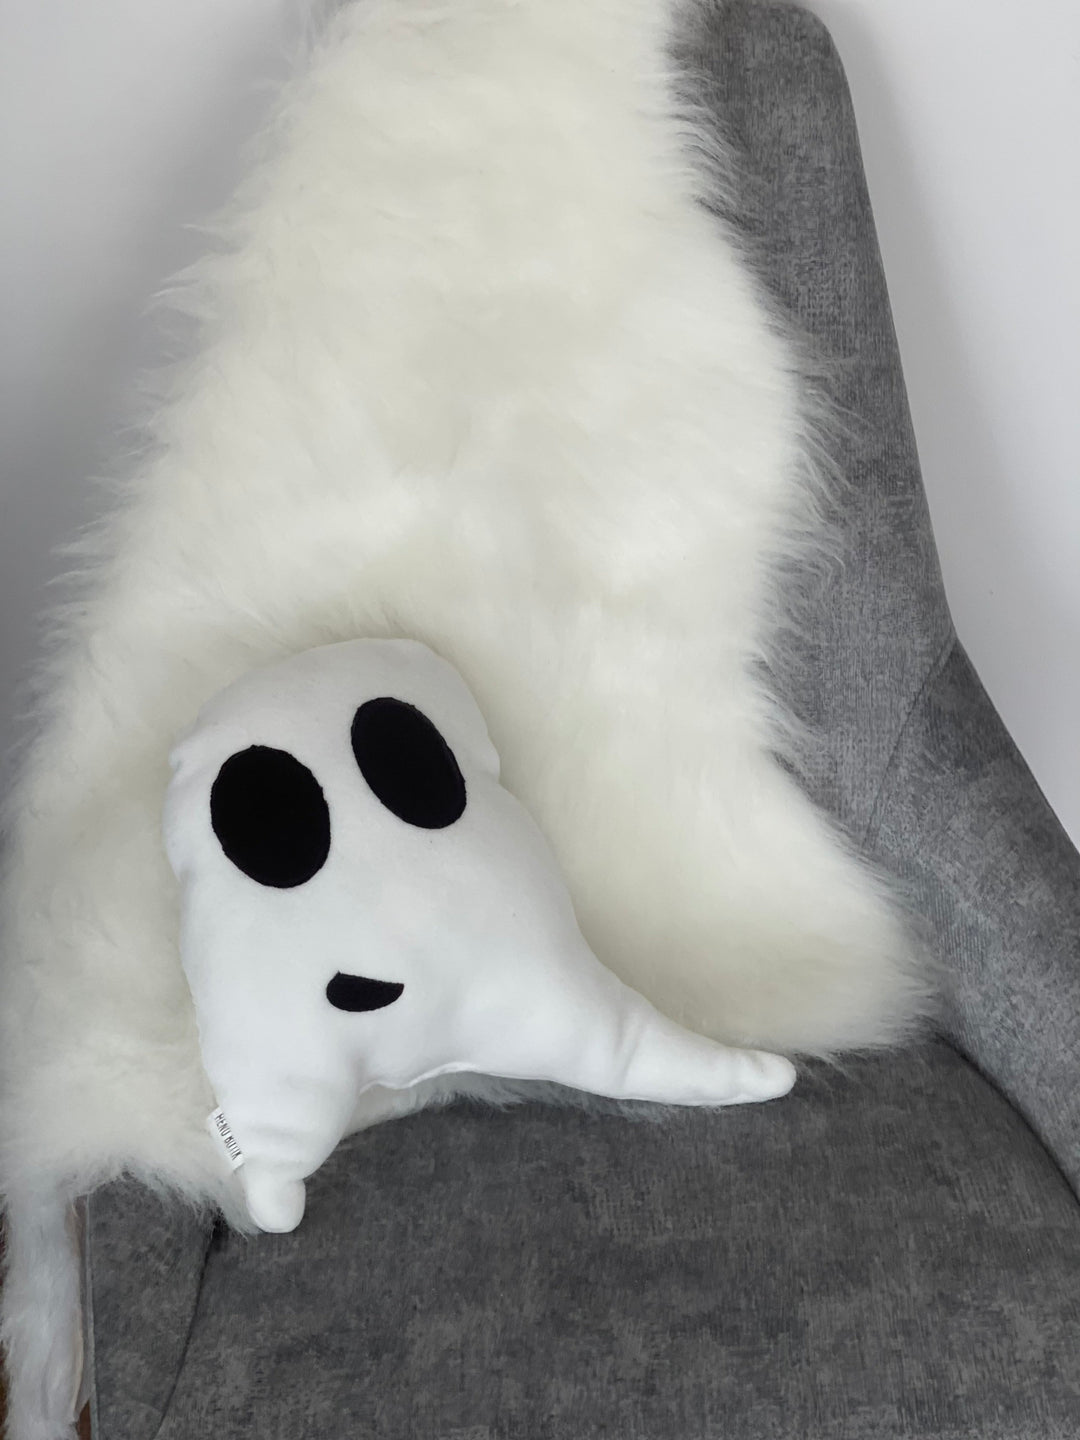 Cute Ghost Pillow Halloween Decor, plush pillow, black and white, spooky decorative pillow Halloween gift